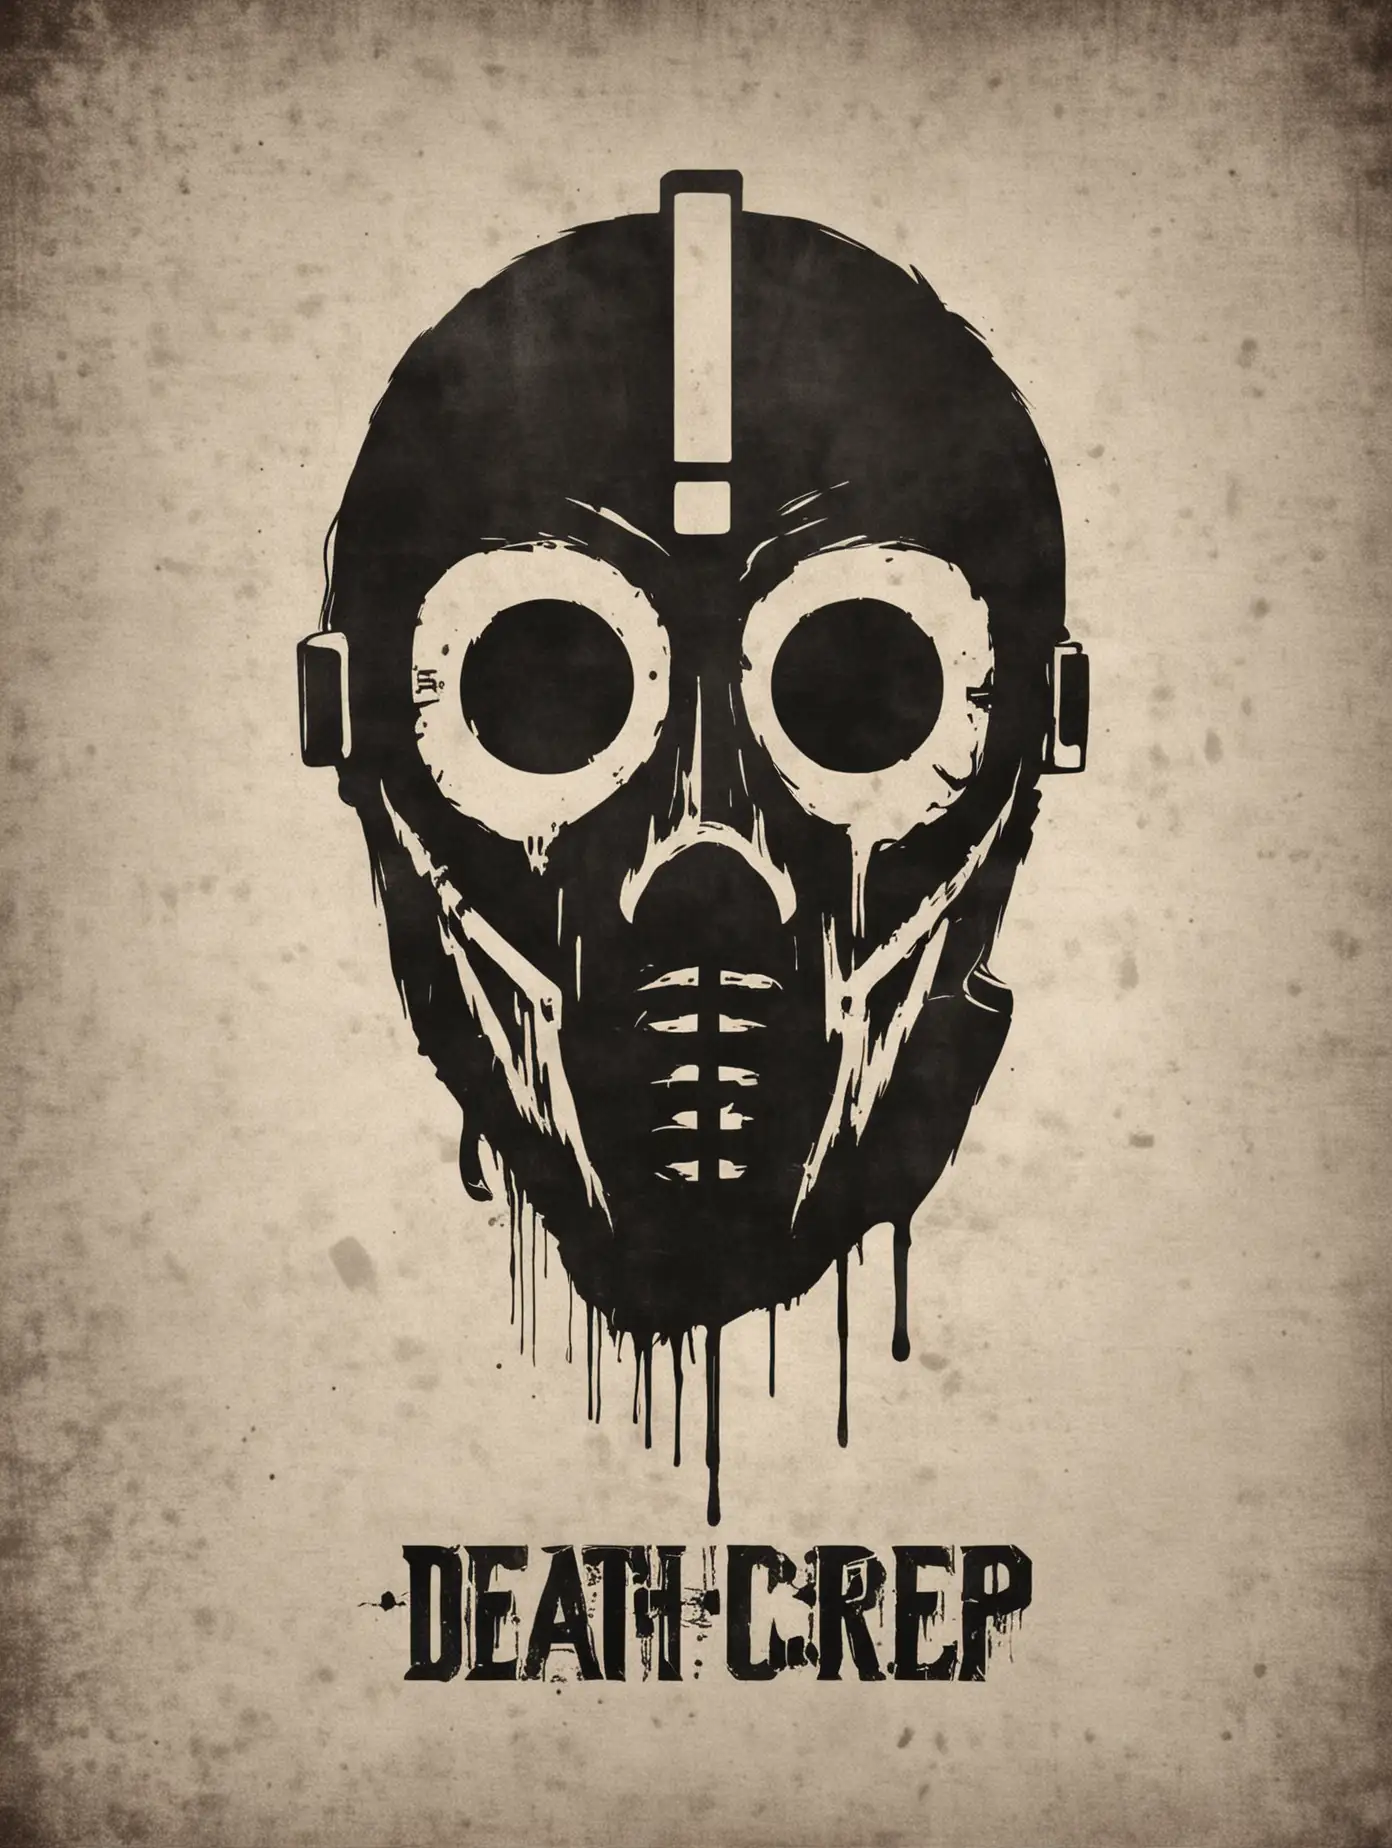 stencil, minimalist, simple, vector art, black and white, silhouette, negative space, grindhouse movie poster, "Death Grip" plague mask